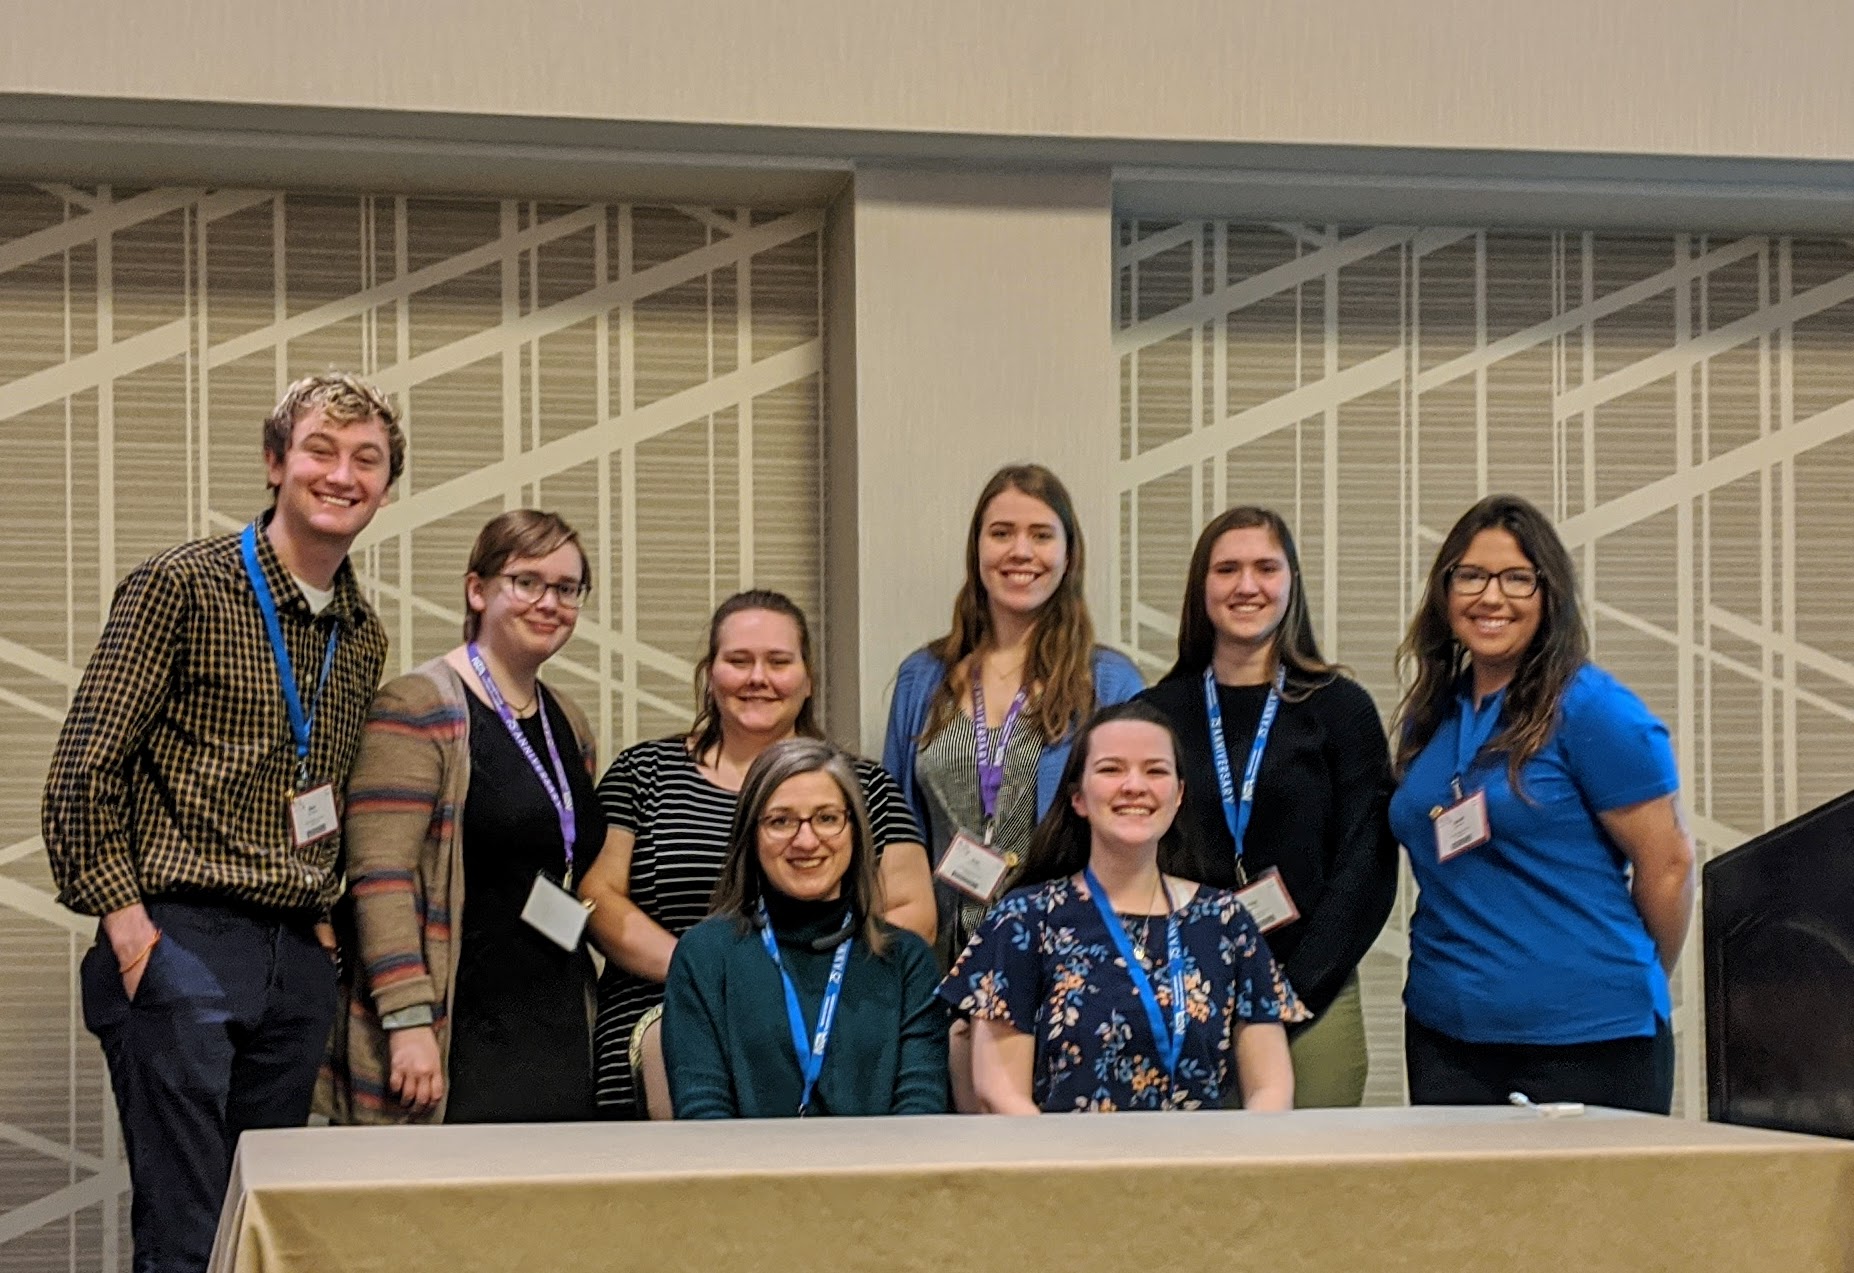 SCED 480/490 students and their professor presented at the NSTA Conference in Seattle in December 2019